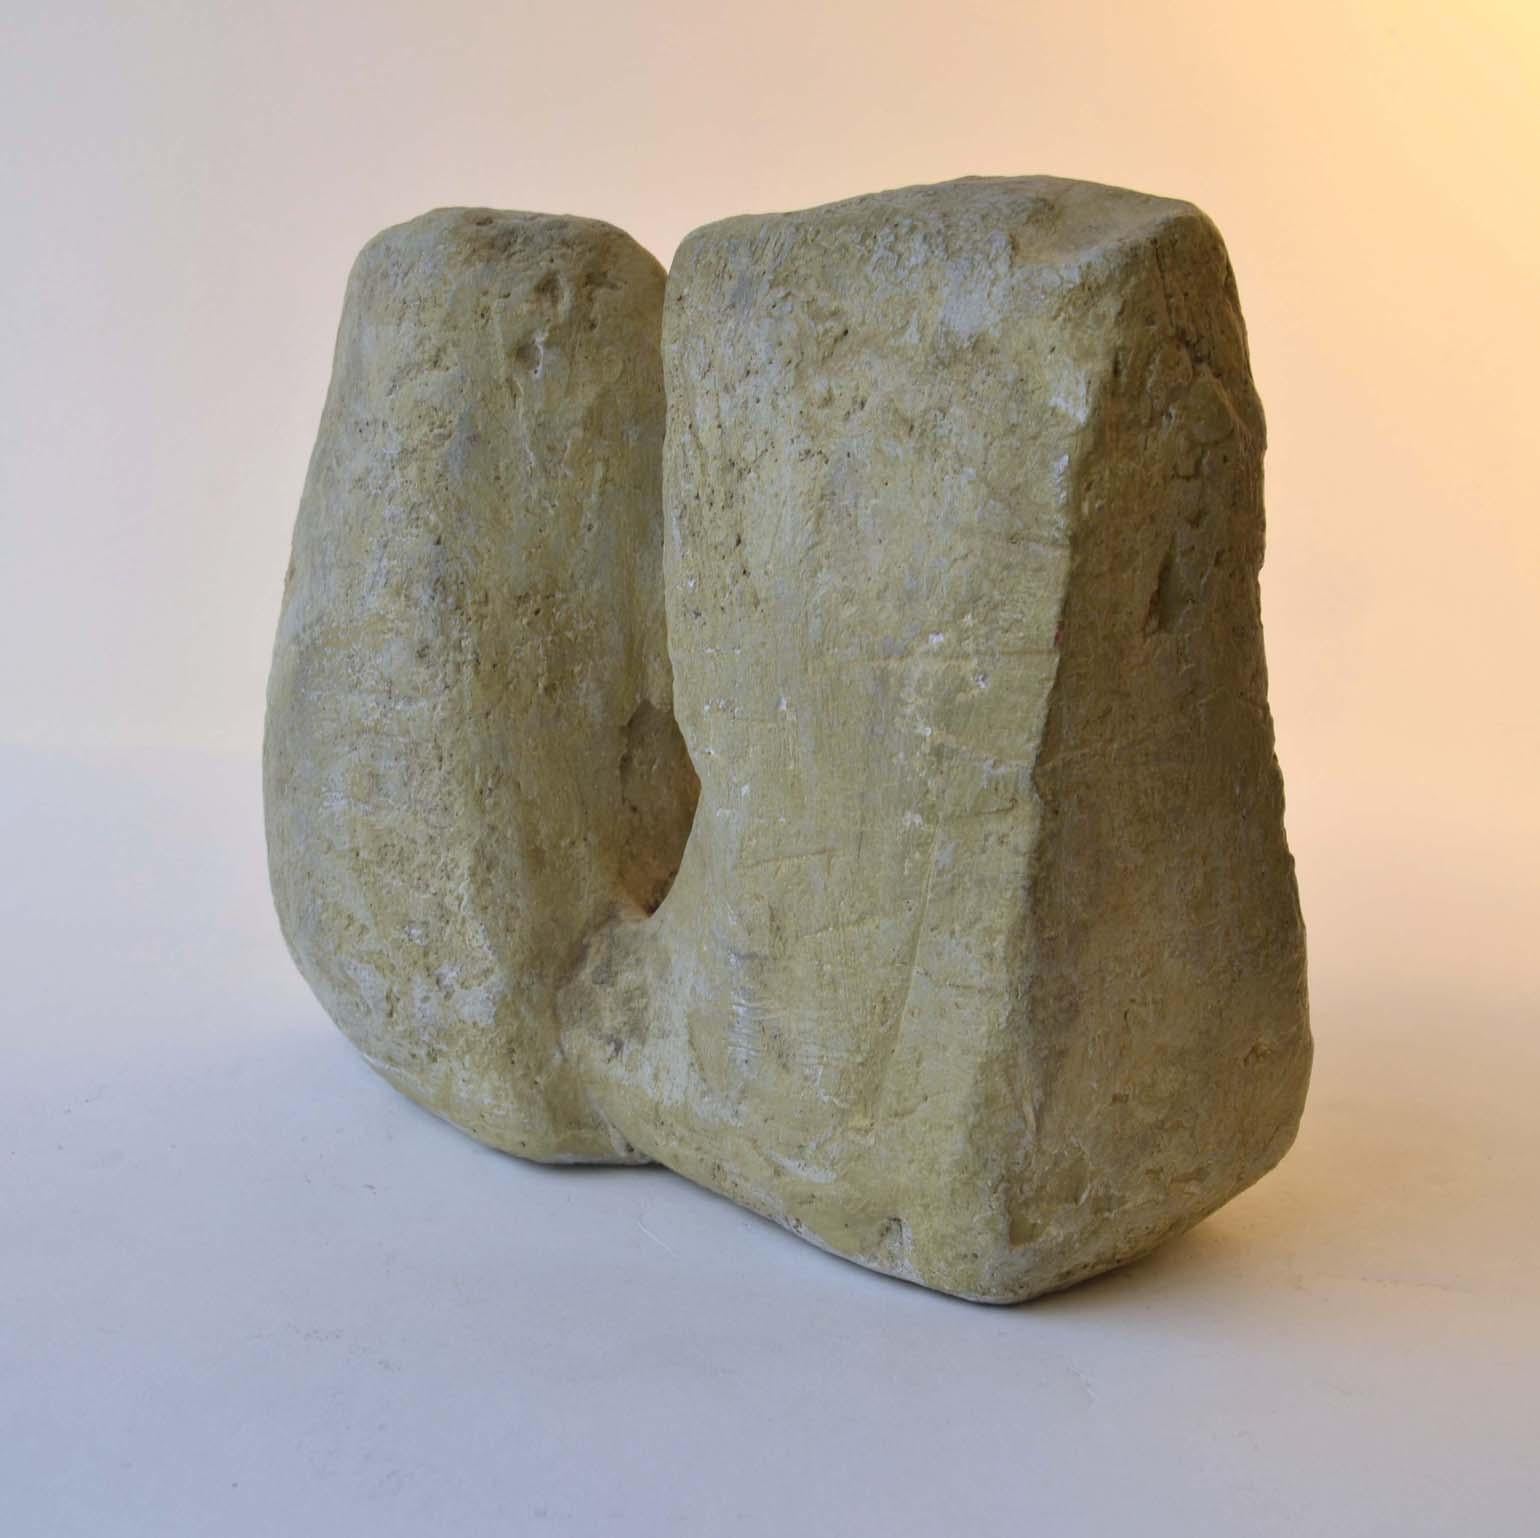 British Abstract Sculpture by Bryan Blow Based on Sandstone Rocks